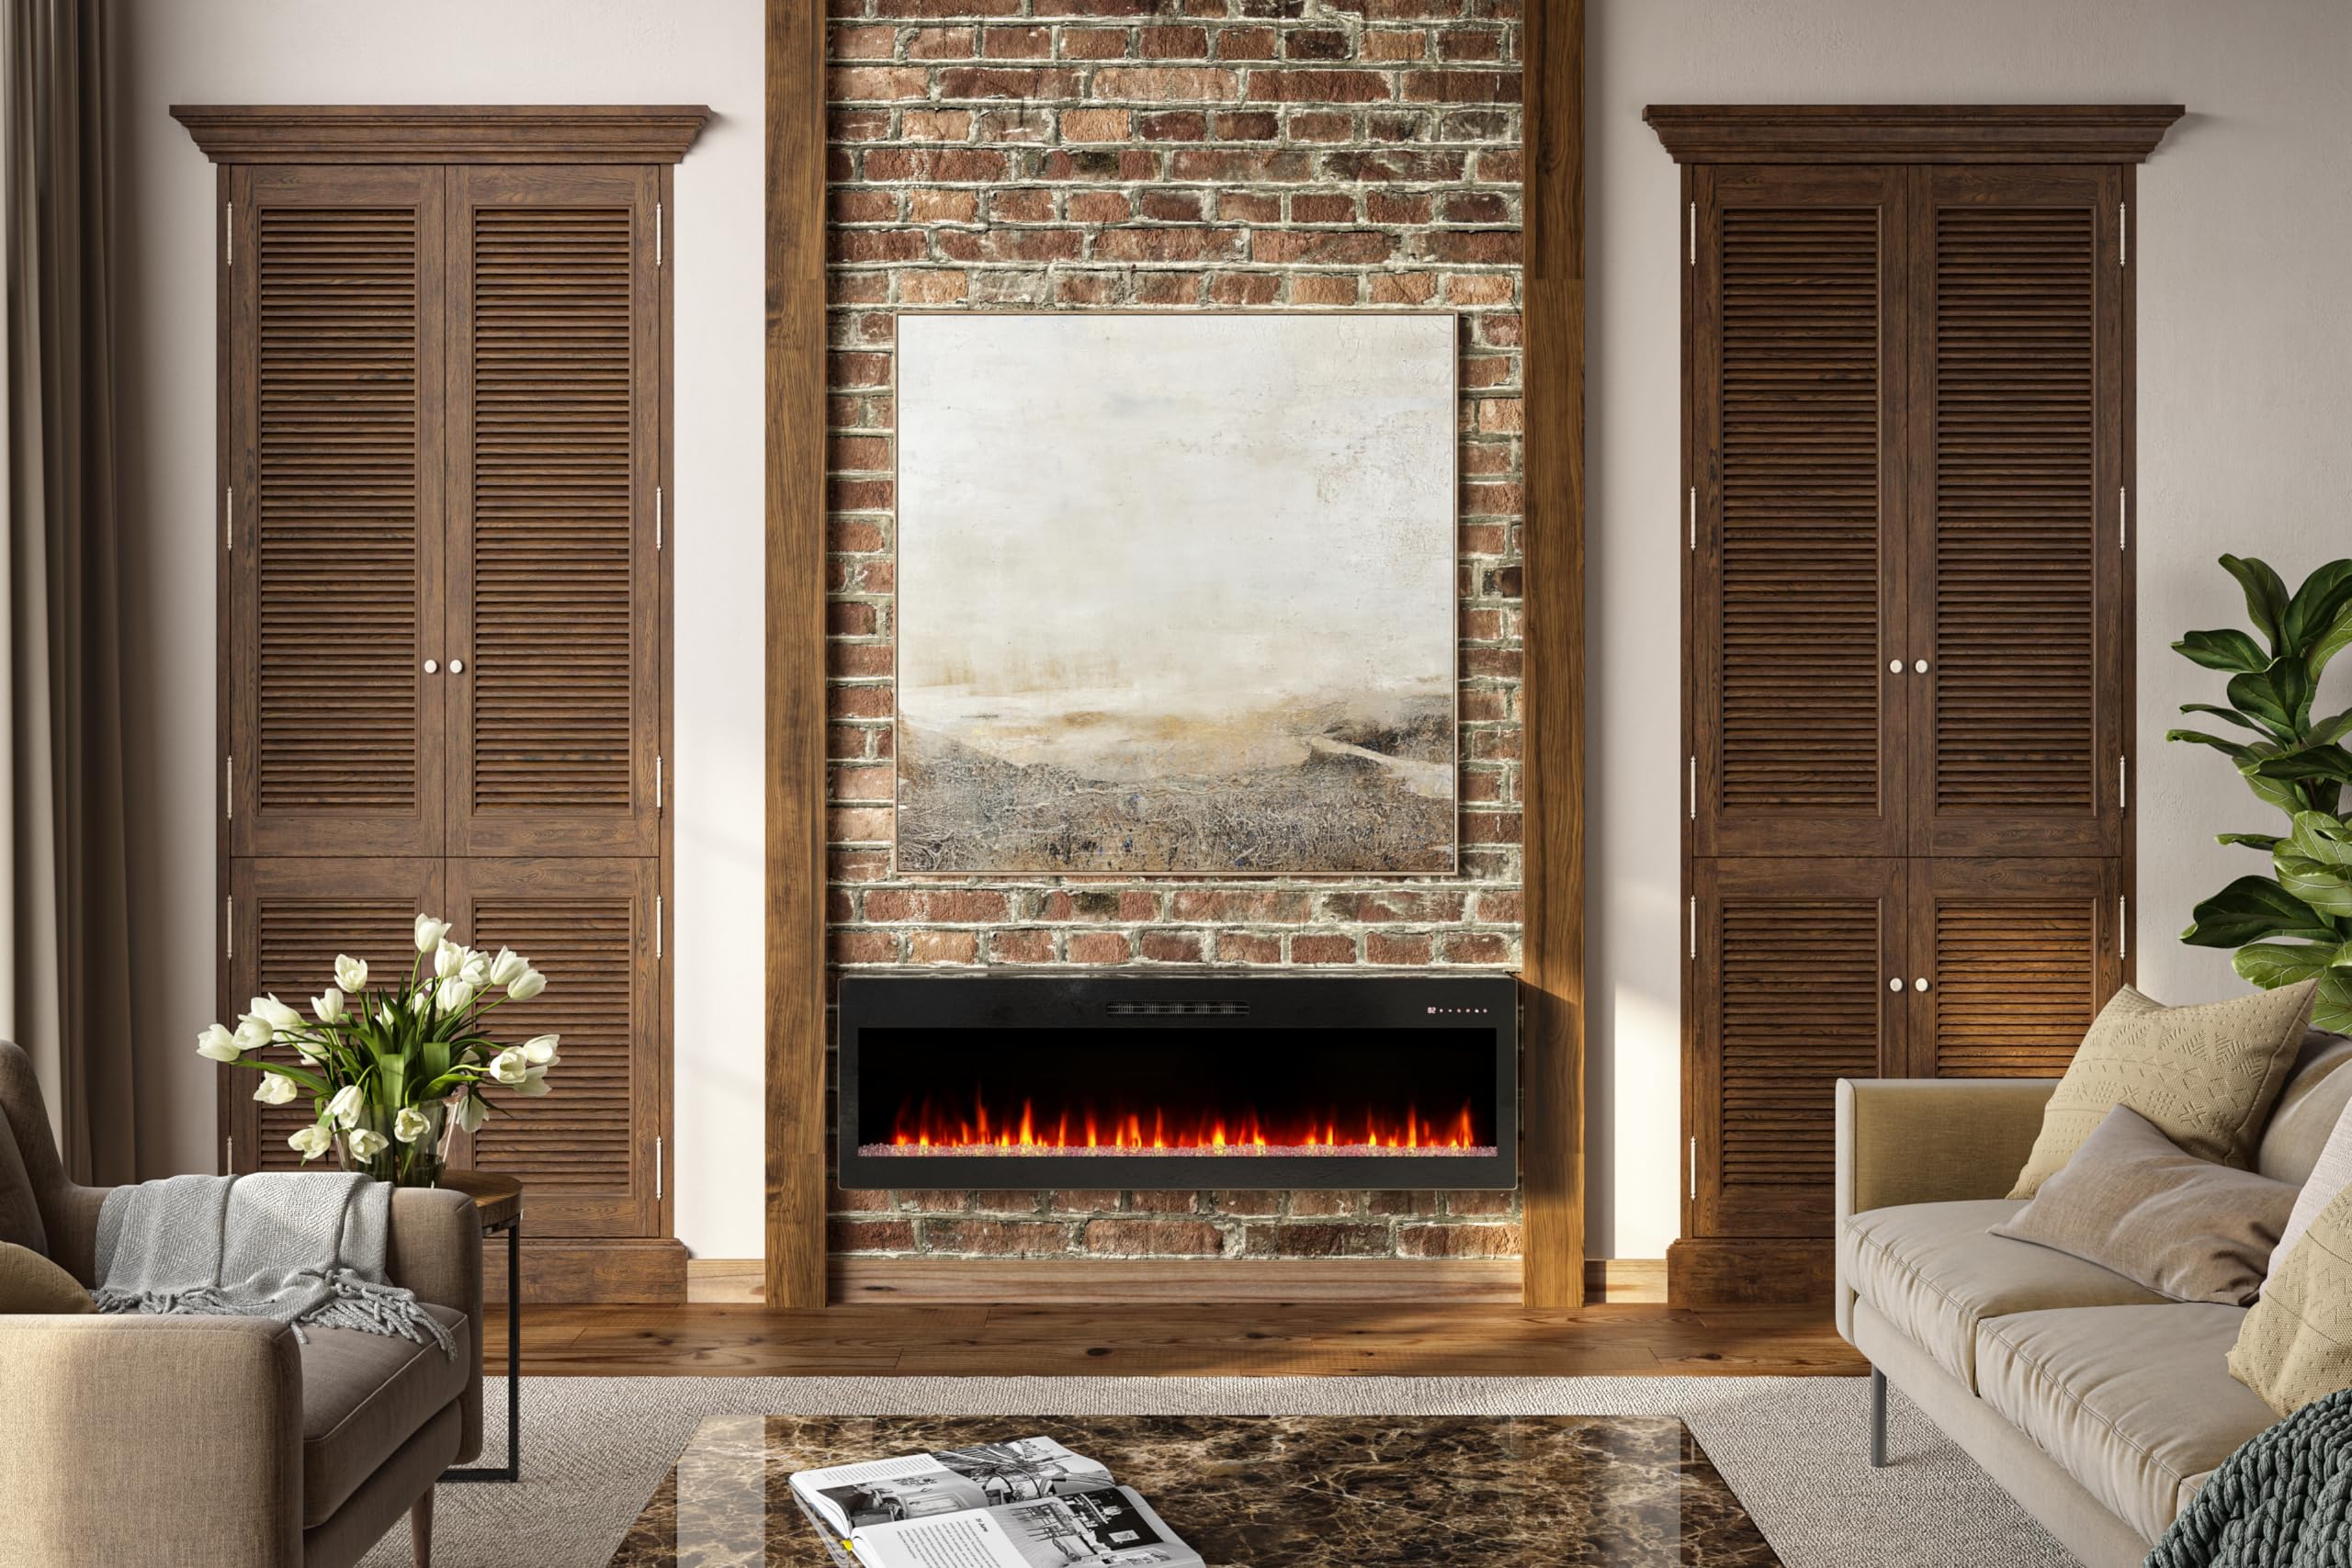 Bridgevine Home 60 inch Recessed and Wall Mounted Electric Fireplace - Modern Touch Screen Fireplace Insert with Adjustable Flame Color and Speed. Includes a Remote Control with Timer.